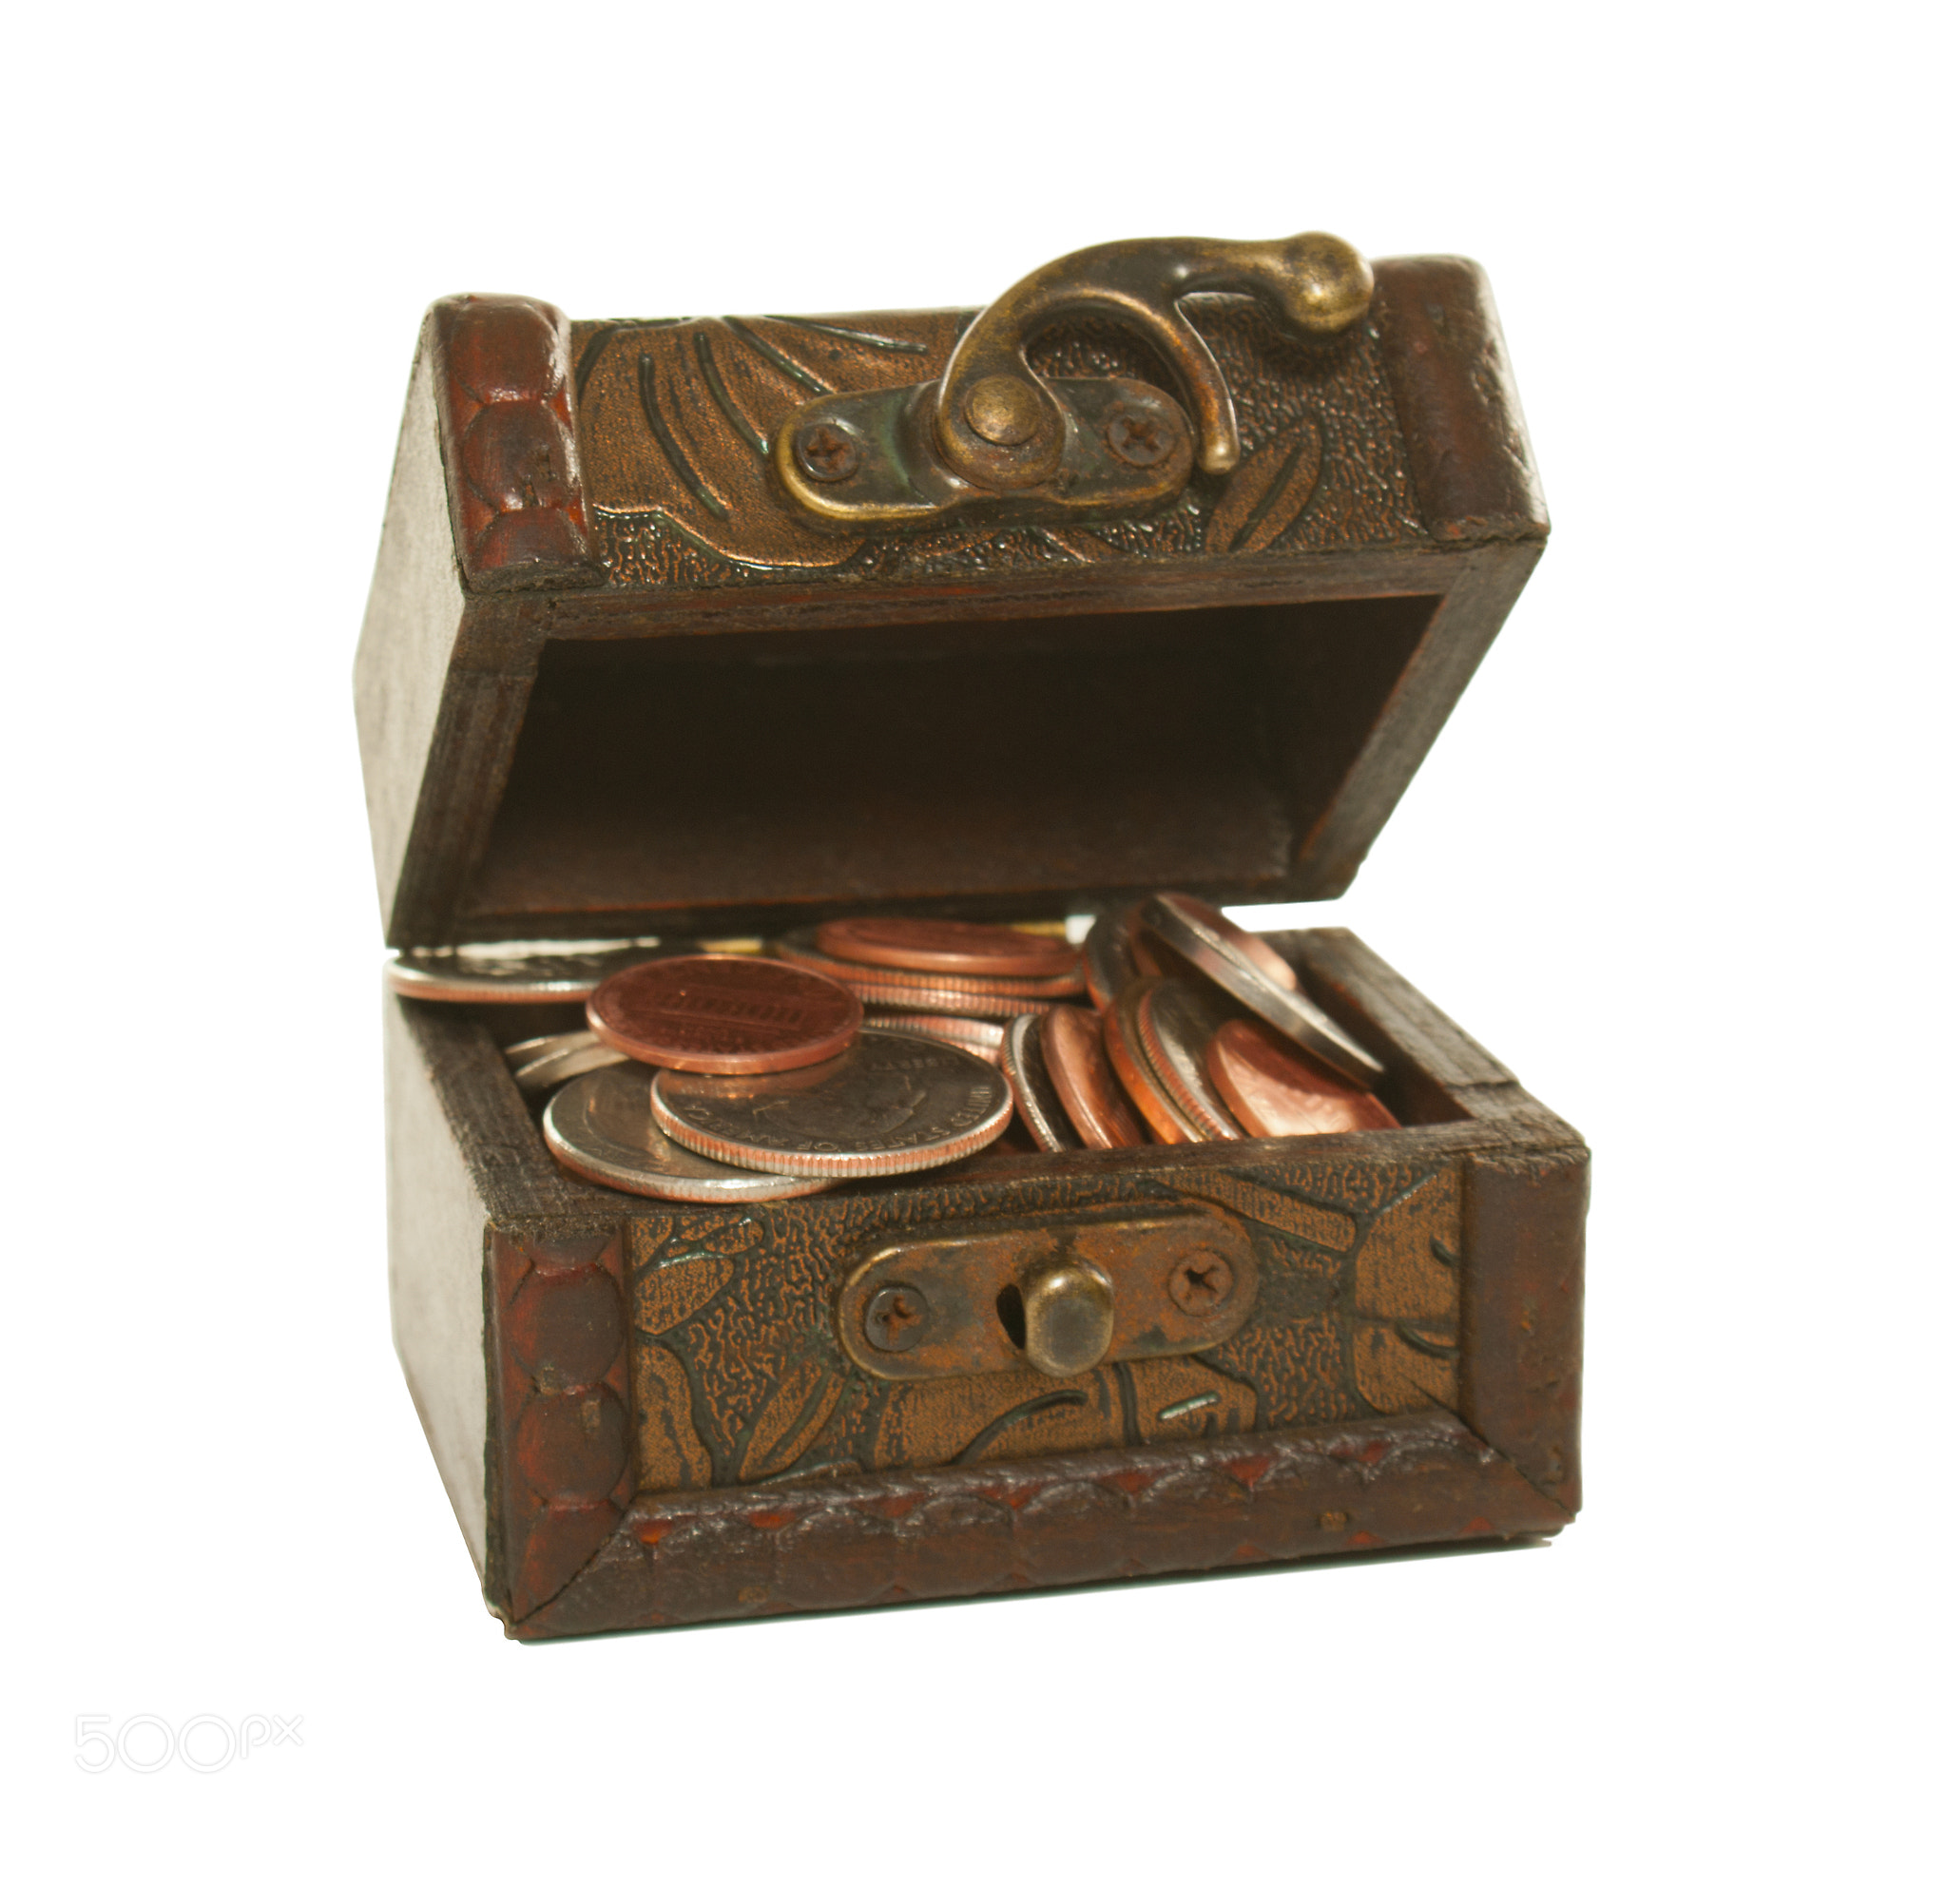 Brown box full of coins